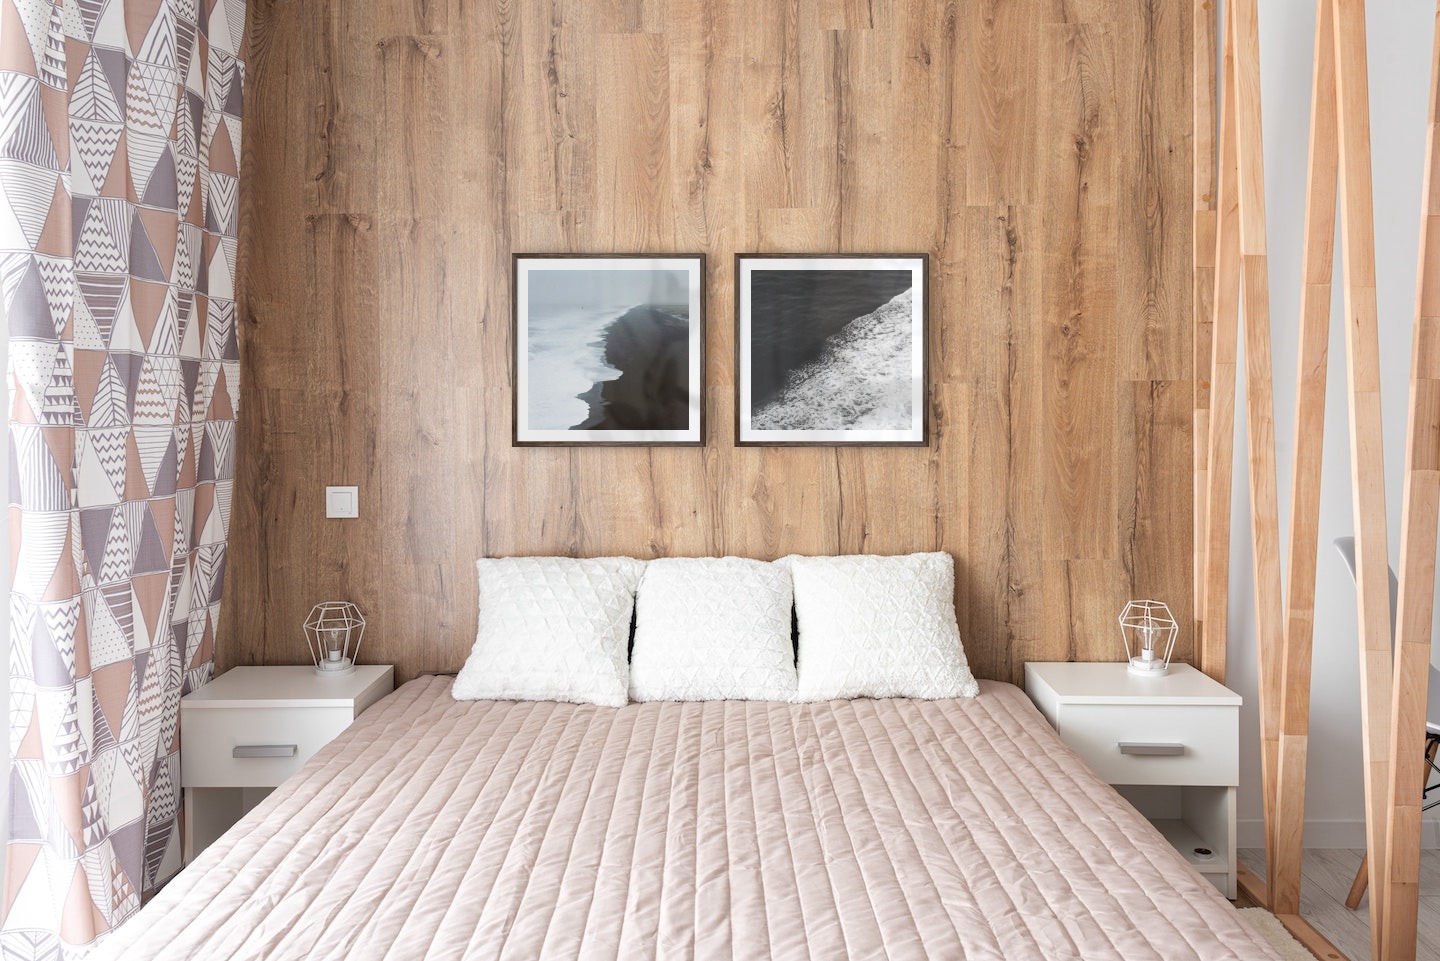 Gallery wall with picture frames in dark wood in sizes 50x50 with prints "Black beach" and "Swell from waves"